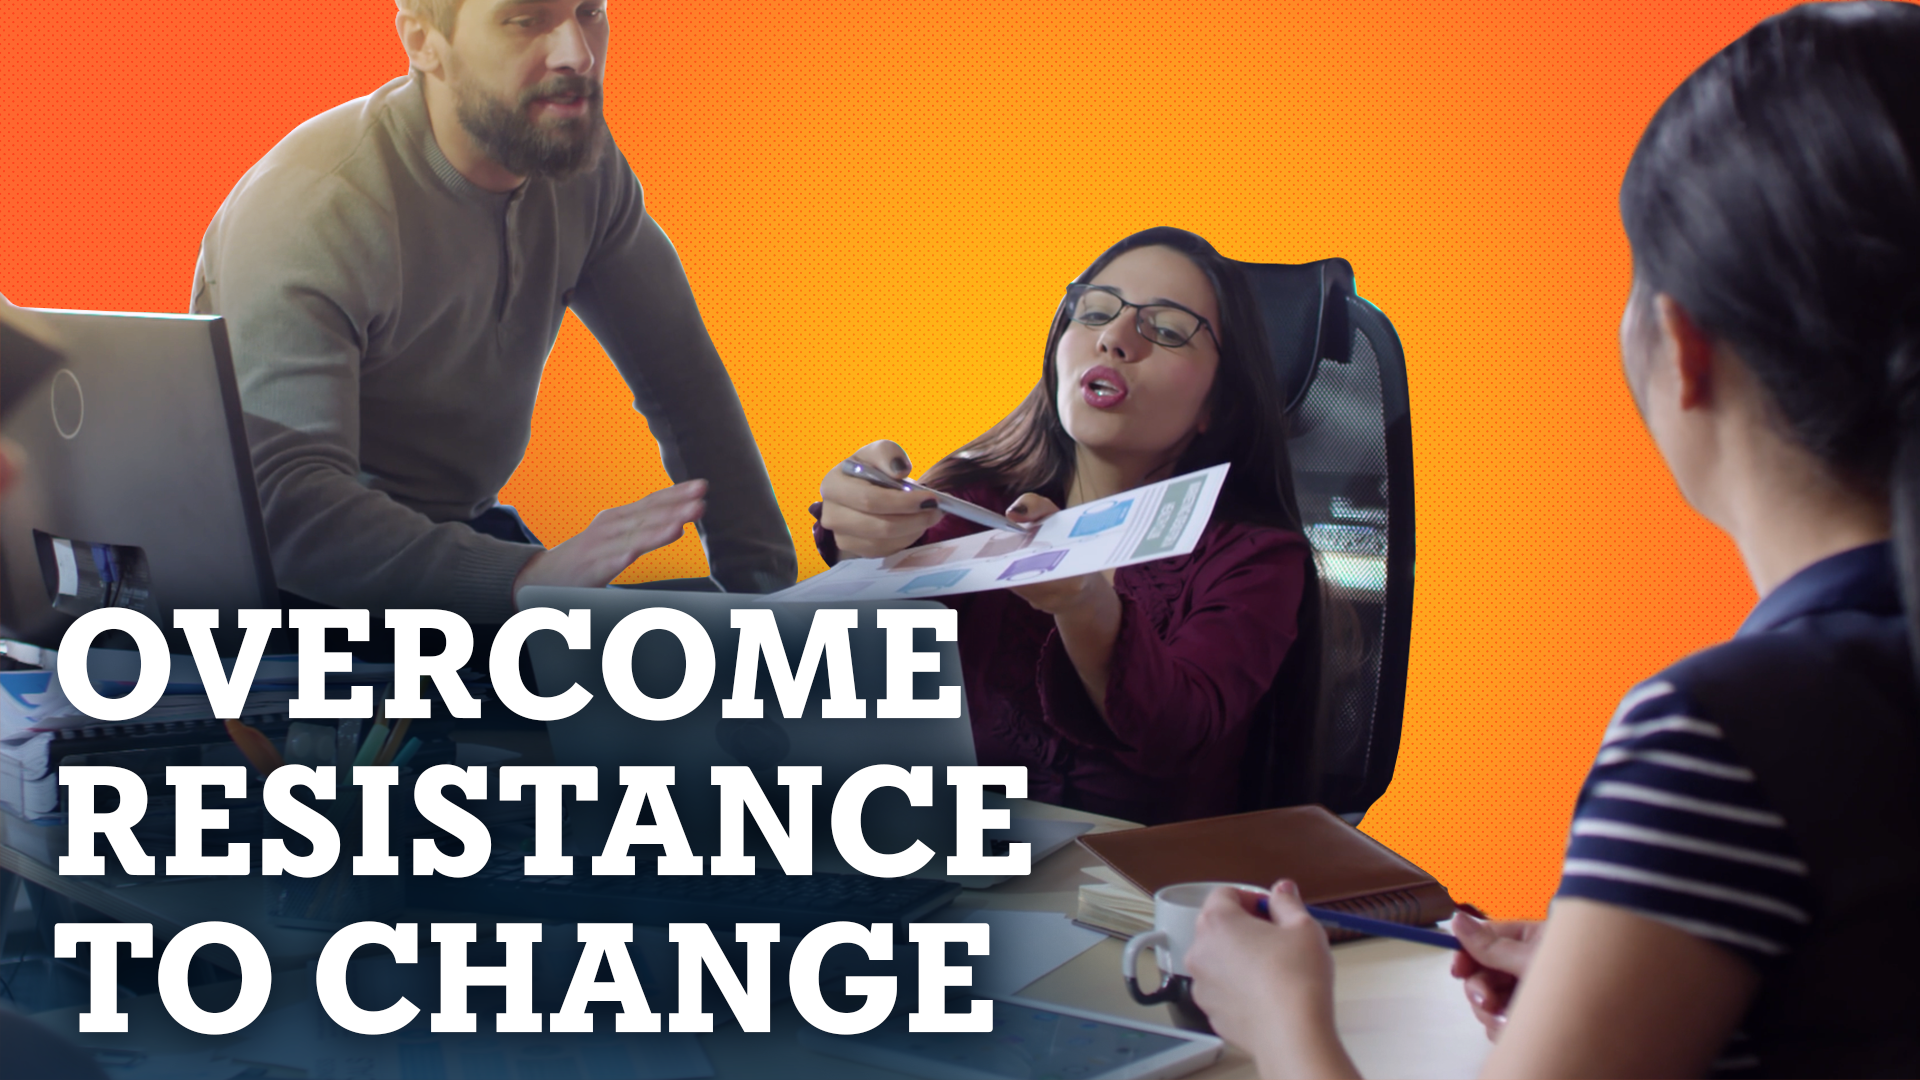 TN - 5 Ways to Overcome Resistance to Change in the Workplace